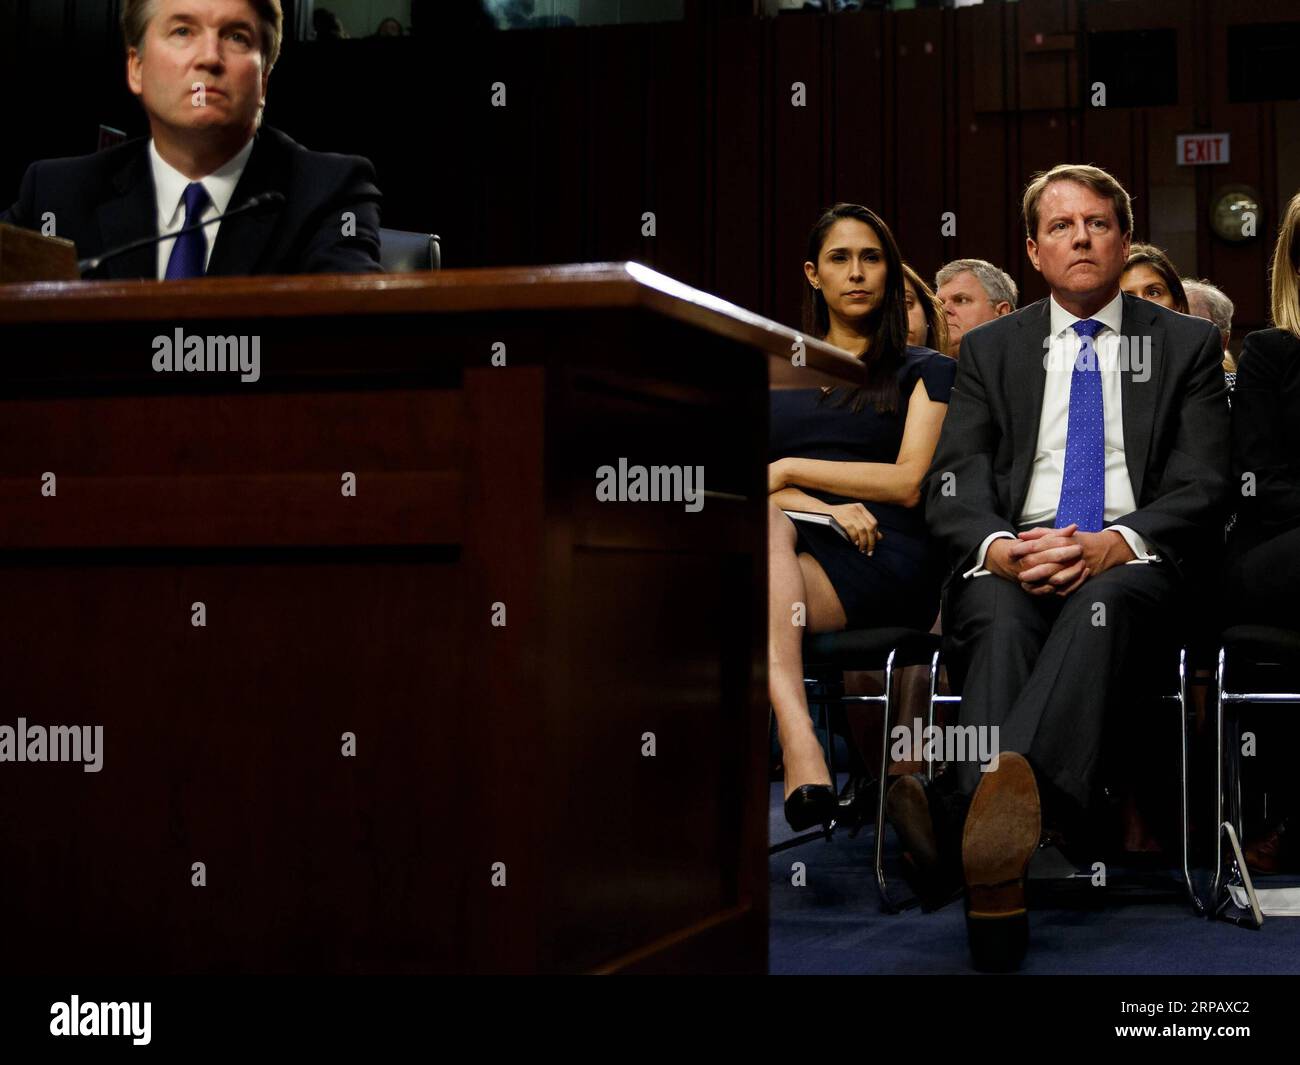 190521 -- WASHINGTON D.C., May 21, 2019 -- Then White House counsel Don McGahn R reacts in the audience during the confirmation hearing for Supreme Court Justice nominee Brett Kavanaugh before the U.S. Senate Judiciary Committee on Capitol Hill in Washington D.C., the United States, on Sept. 4, 2018. The White House on Monday instructed former counsel Don McGahn to defy a congressional subpoena and skip a hearing scheduled for Tuesday relating to the Russia probe.  U.S.-WASHINGTON D.C.-DON MCGAHN-SUBPOENA TingxShen PUBLICATIONxNOTxINxCHN Stock Photo